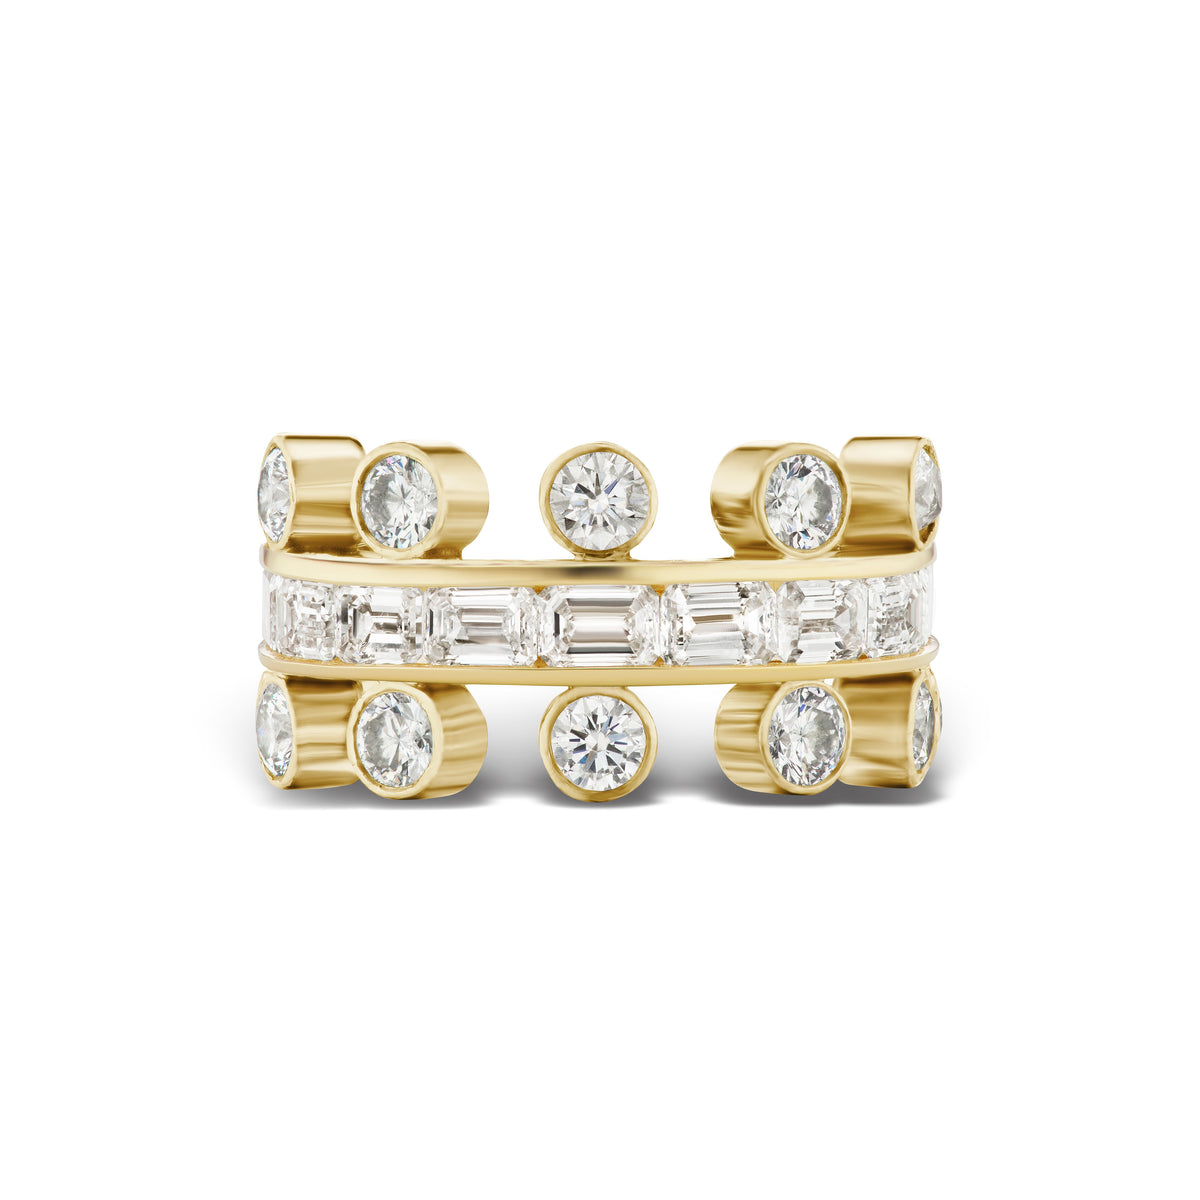 Crown Ring in Yellow Gold with Bezel Set Round and Emerald Cut Diamonds